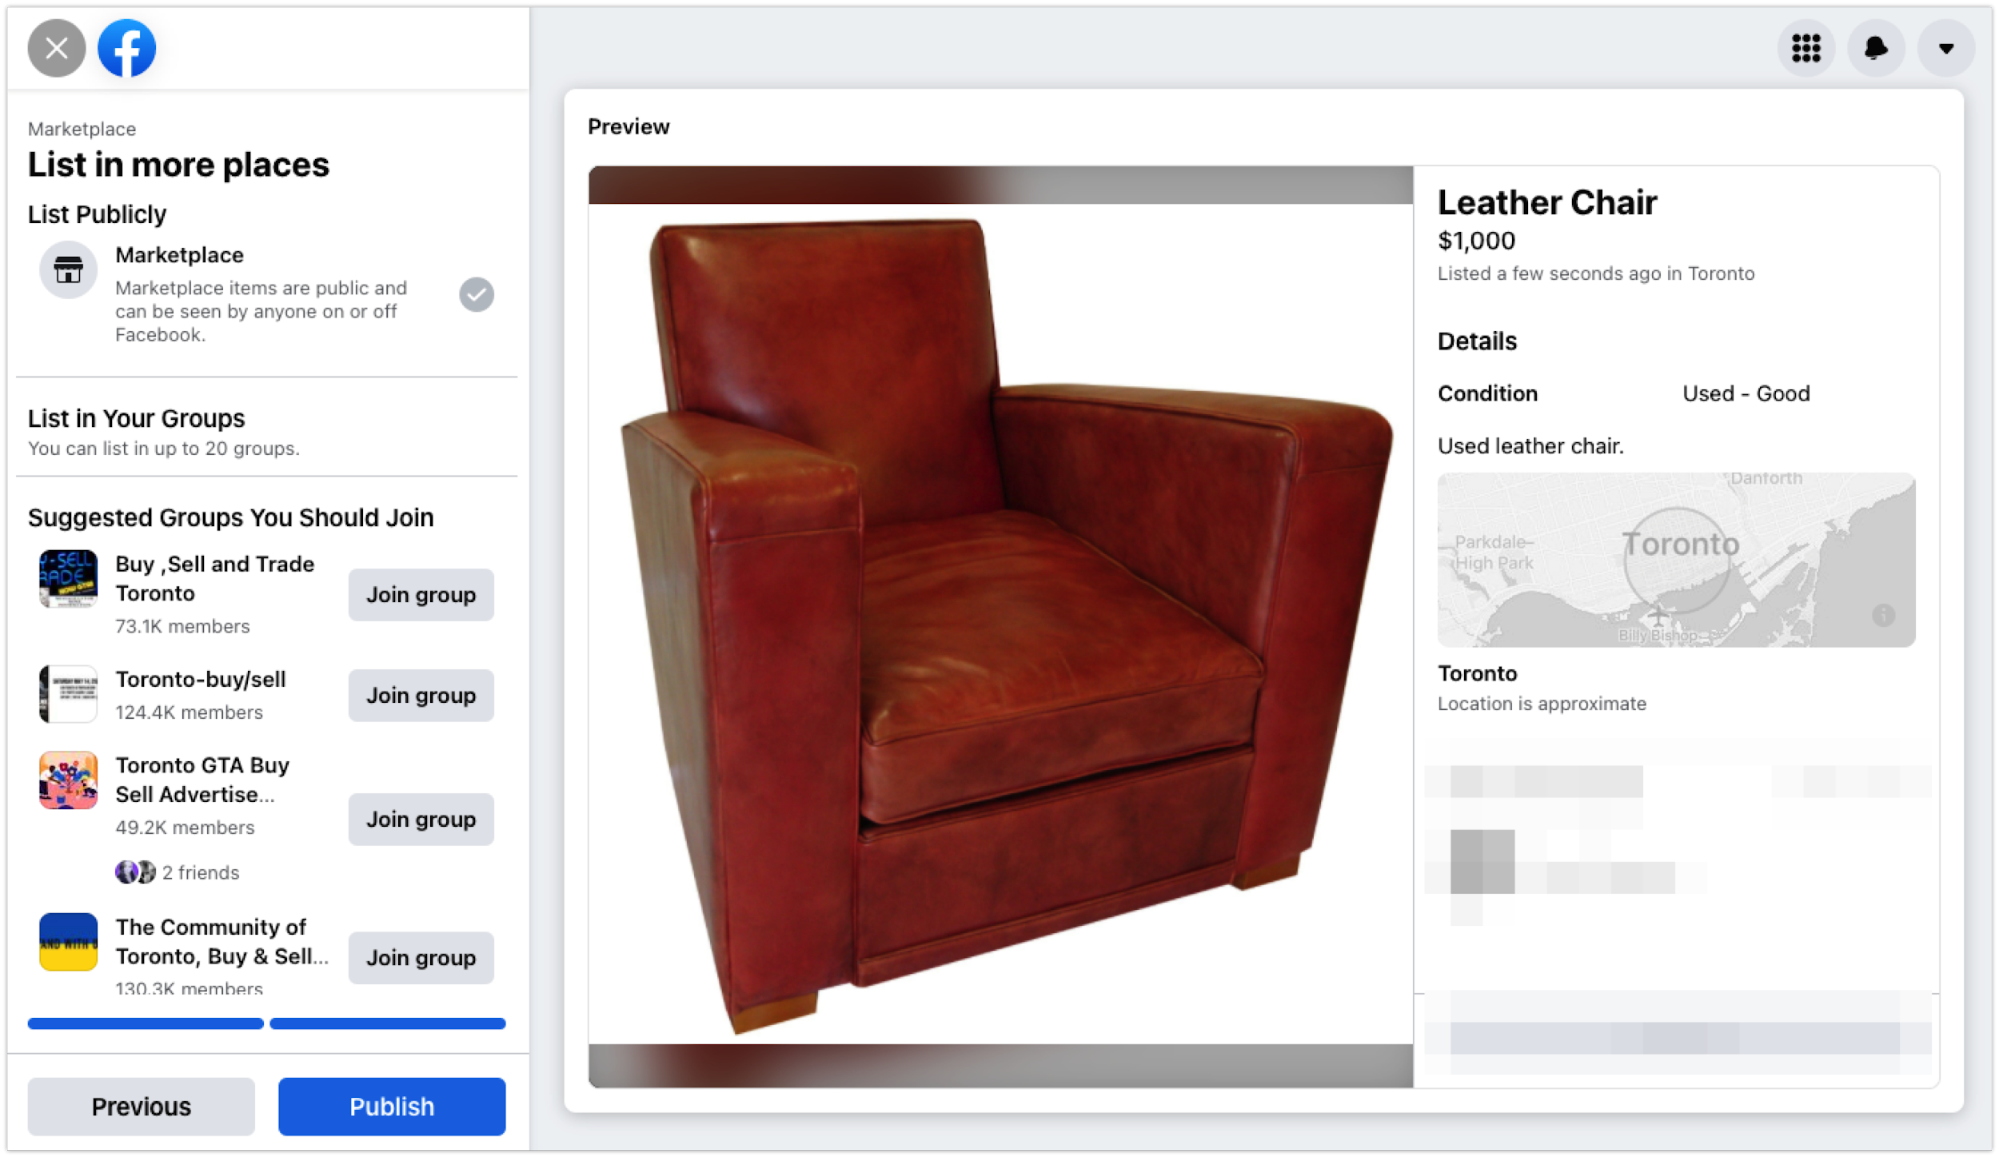 listing-for-leather-chair-before-publishing